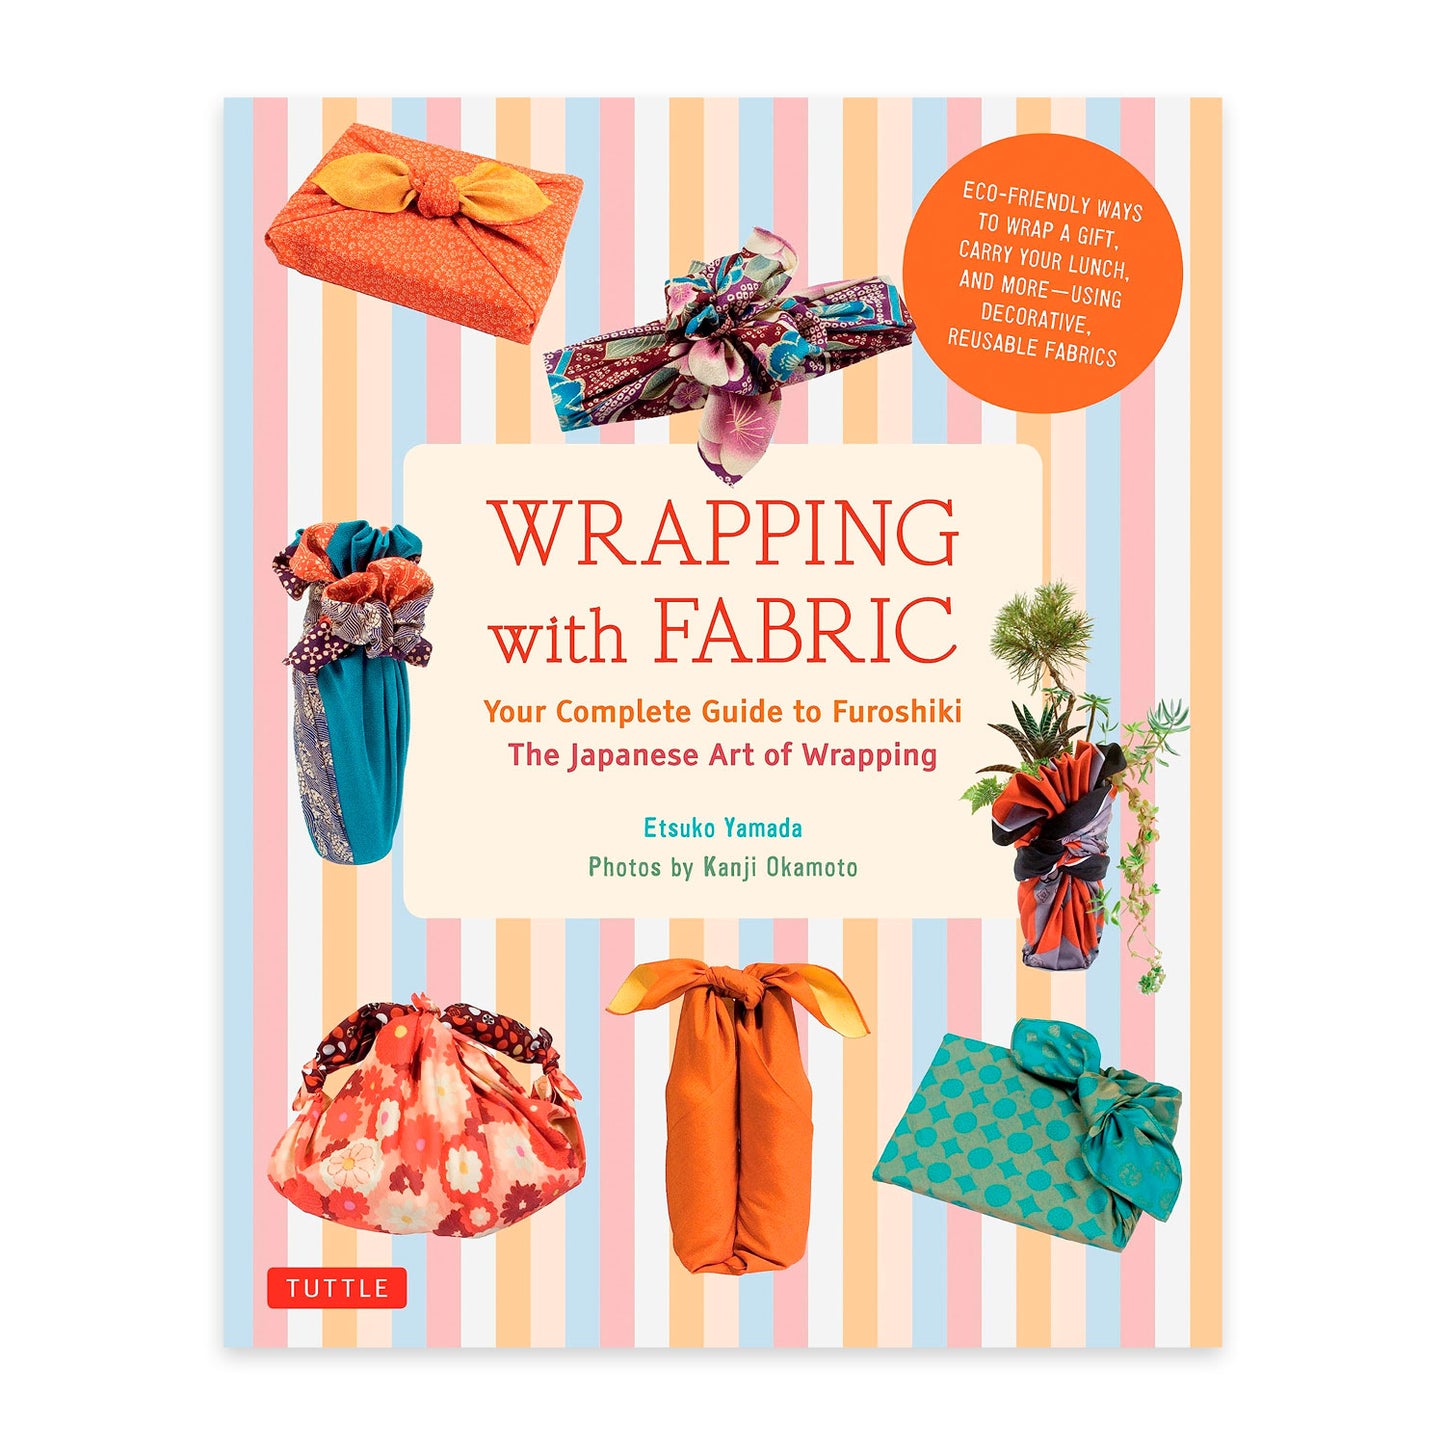 Wrapping with Fabric - Your Complete Guide to Furoshiki